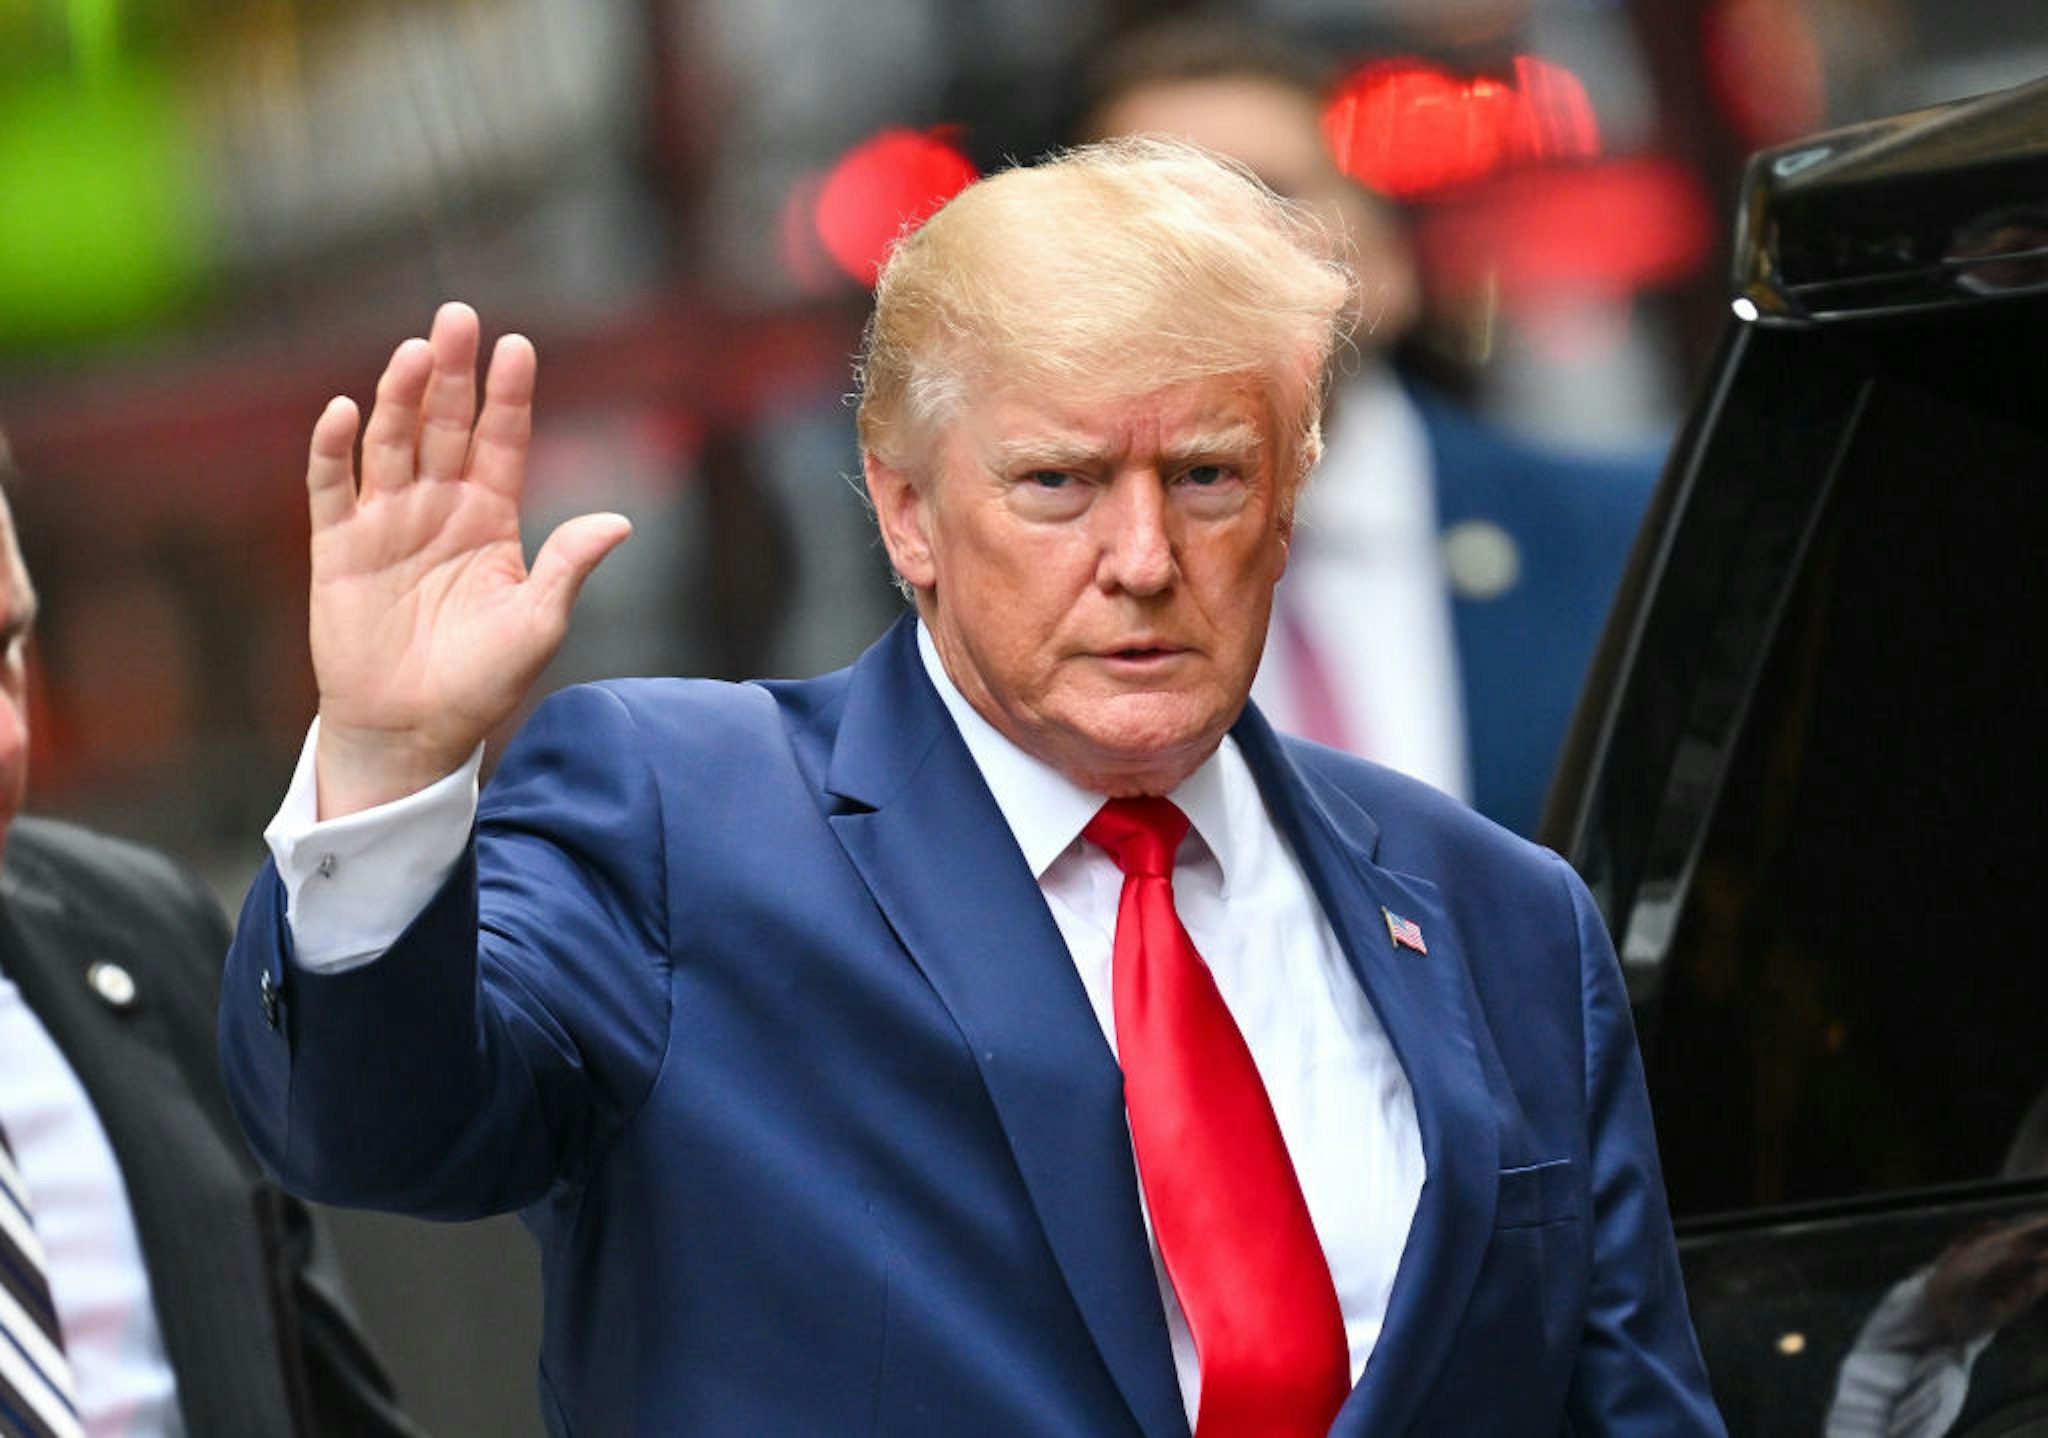 NEW YORK, NEW YORK - AUGUST 10: Former U.S. President Donald Trump leaves Trump Tower to meet with New York Attorney General Letitia James for a civil investigation on August 10, 2022 in New York City.